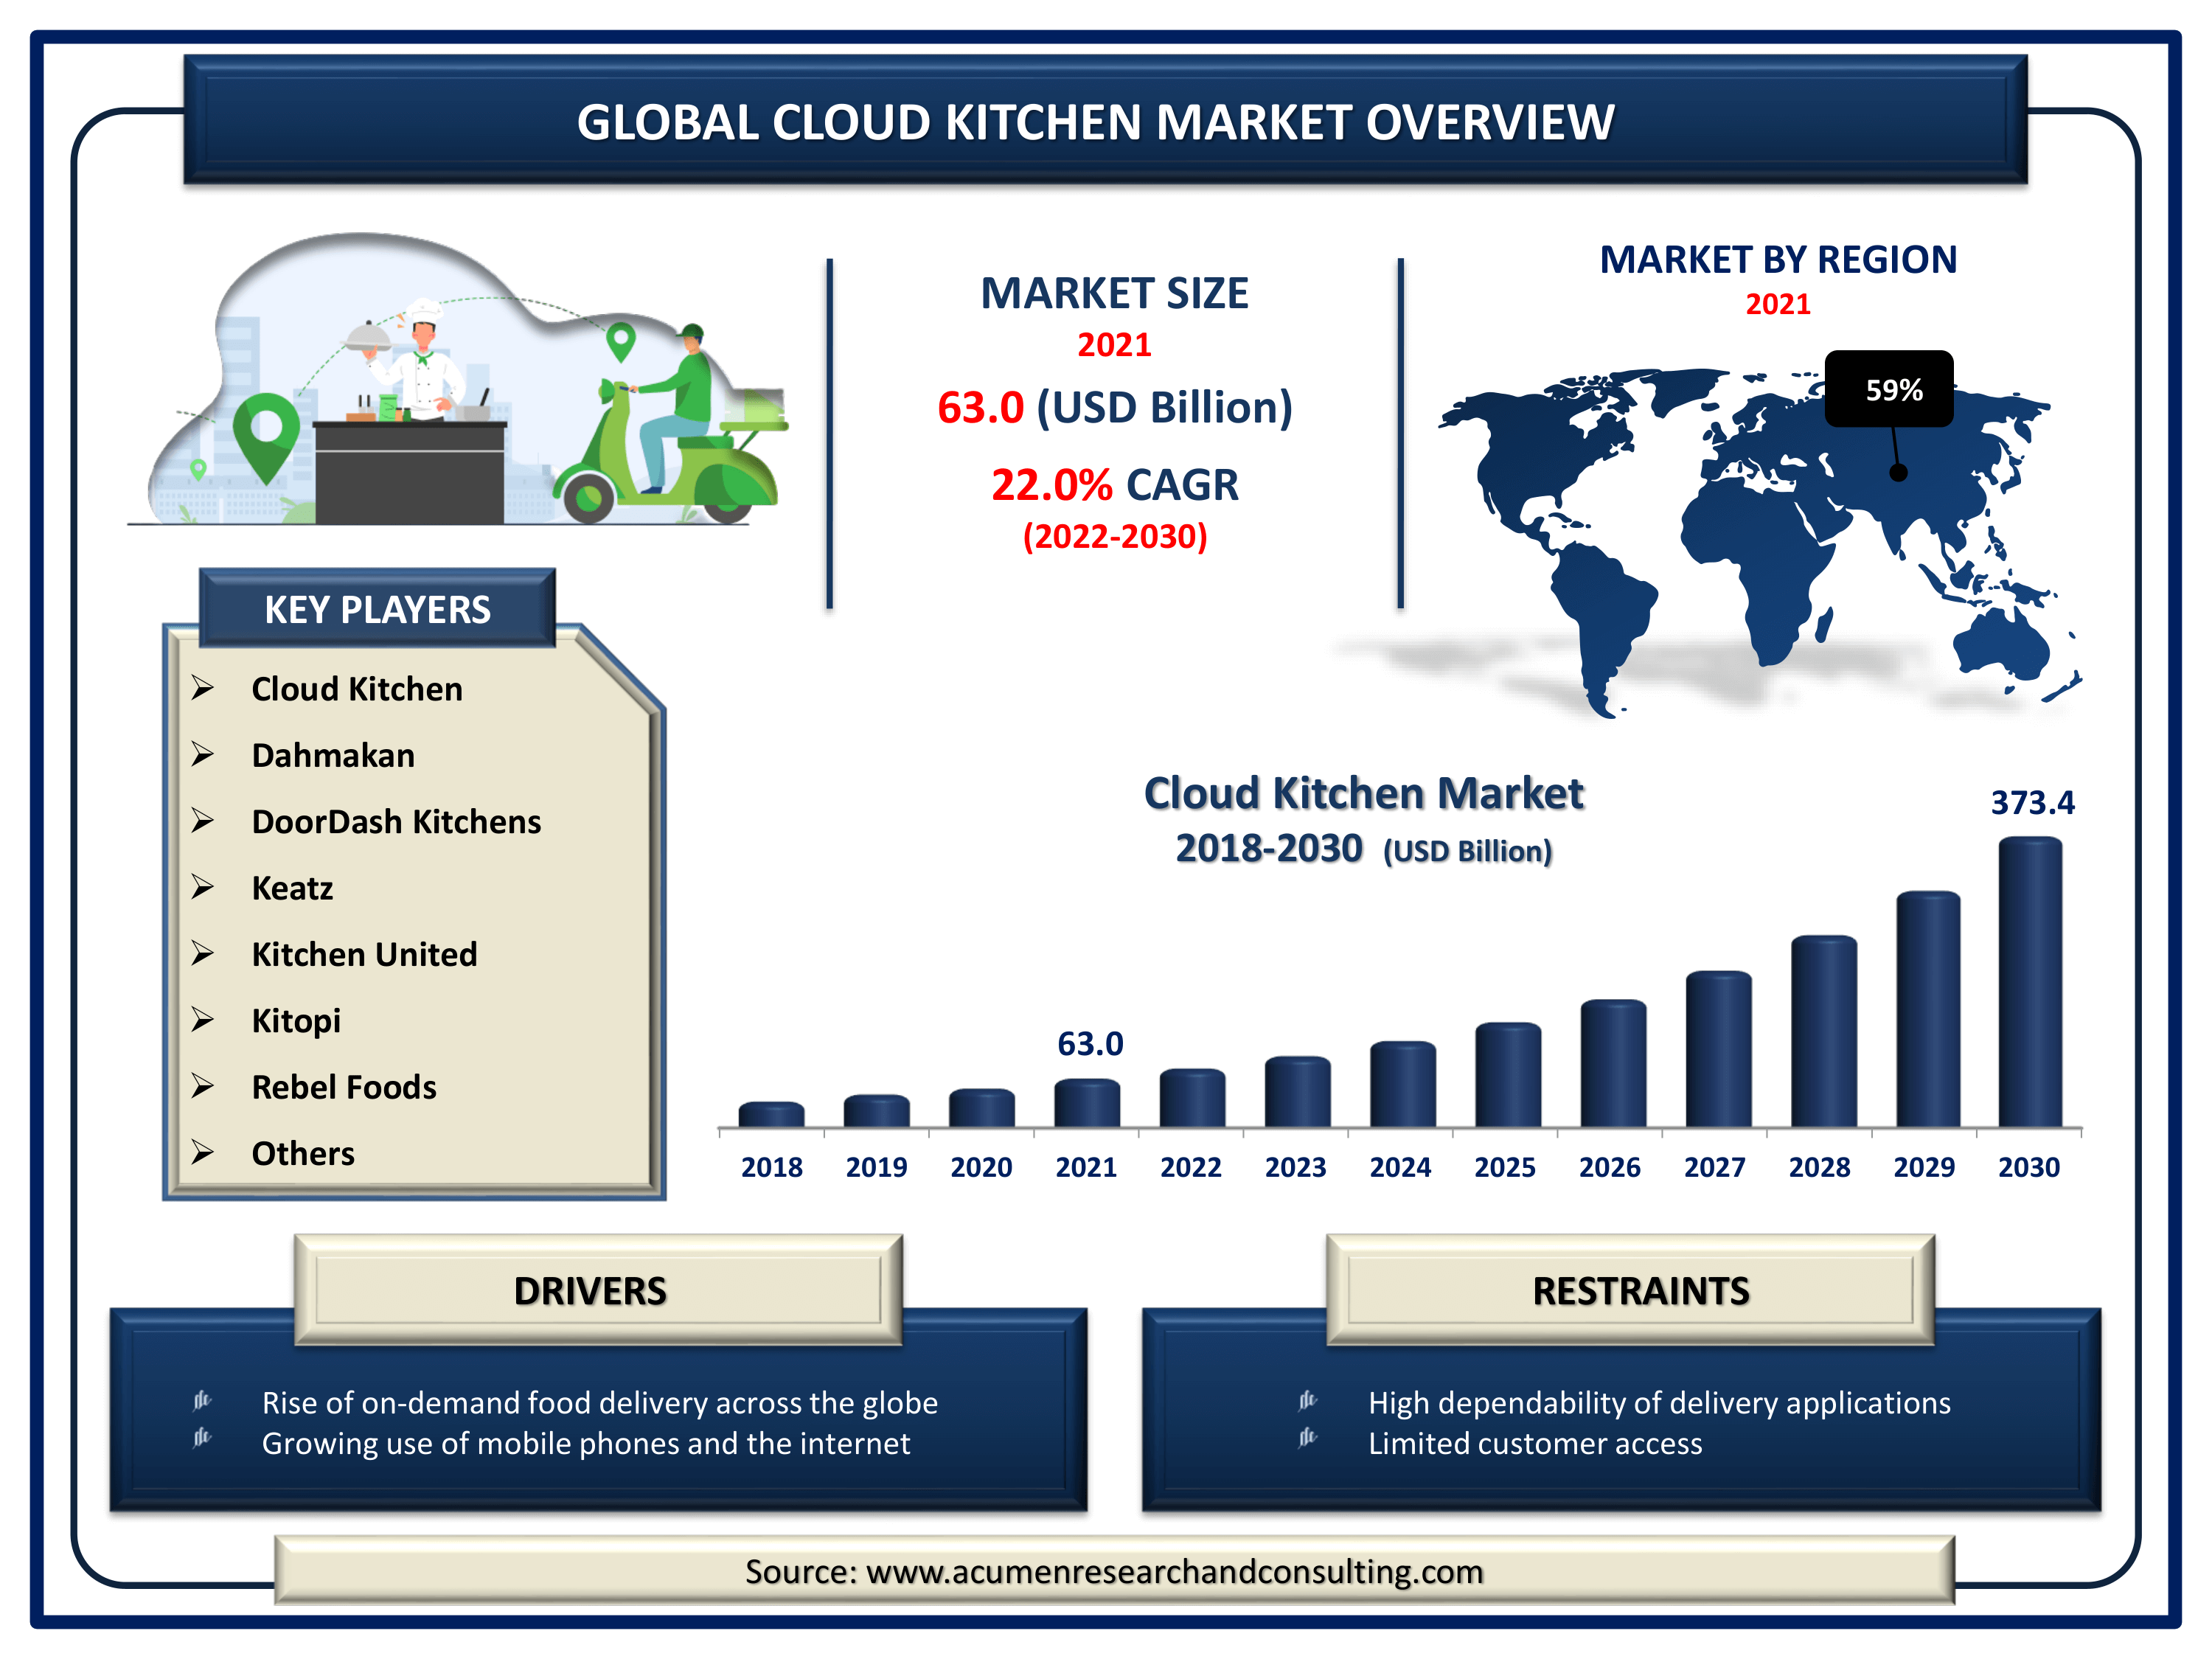 Global Cloud Kitchen market revenue is expected to increase by USD 373.4 billion by 2030, with a 30.0% CAGR from 2022 to 2030.